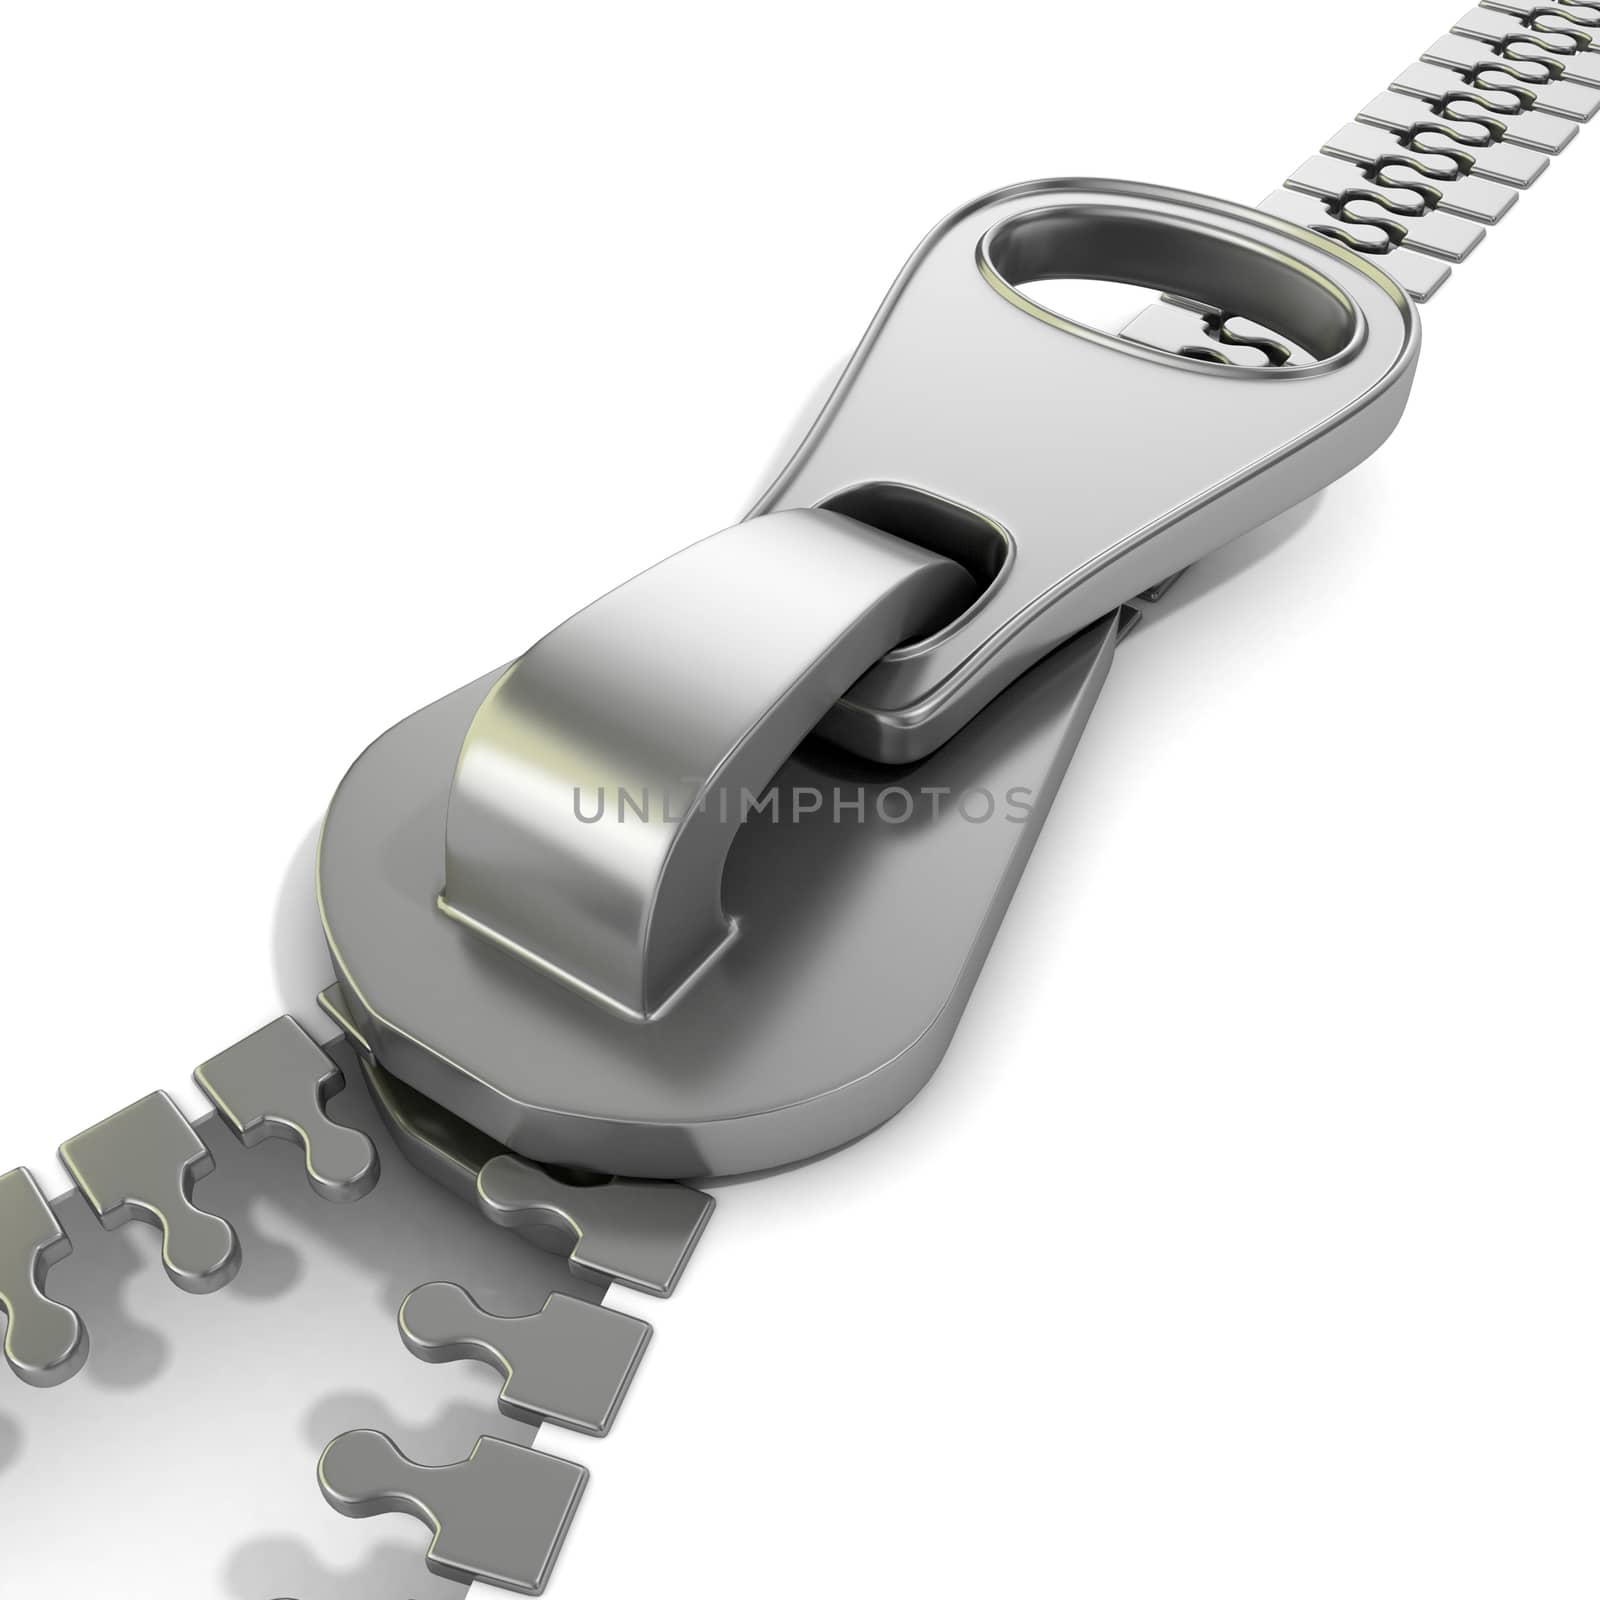 Zipper macro view. 3D render illustration isolated on white background